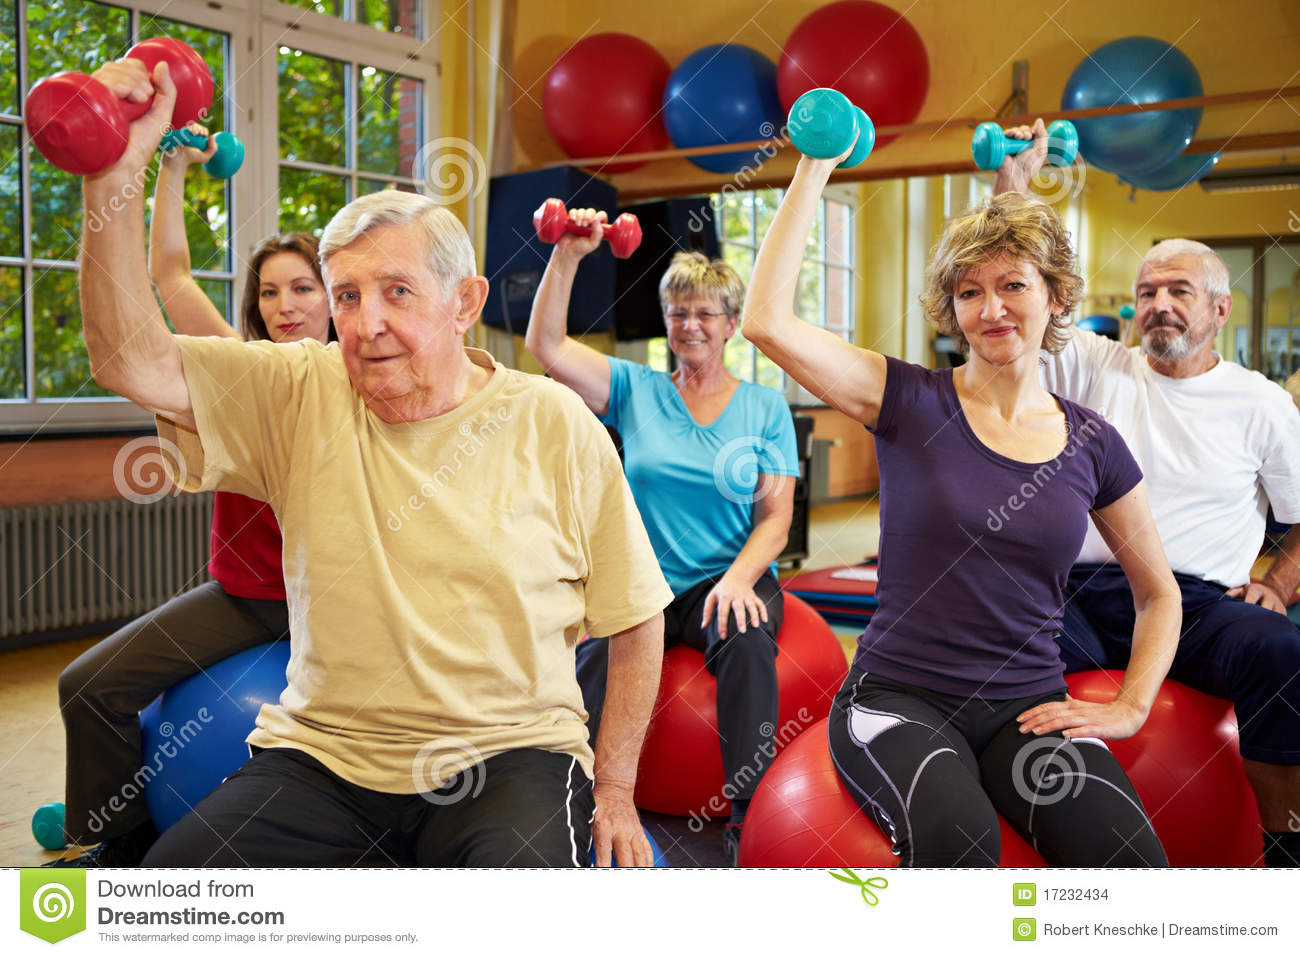 Group of People Working Out